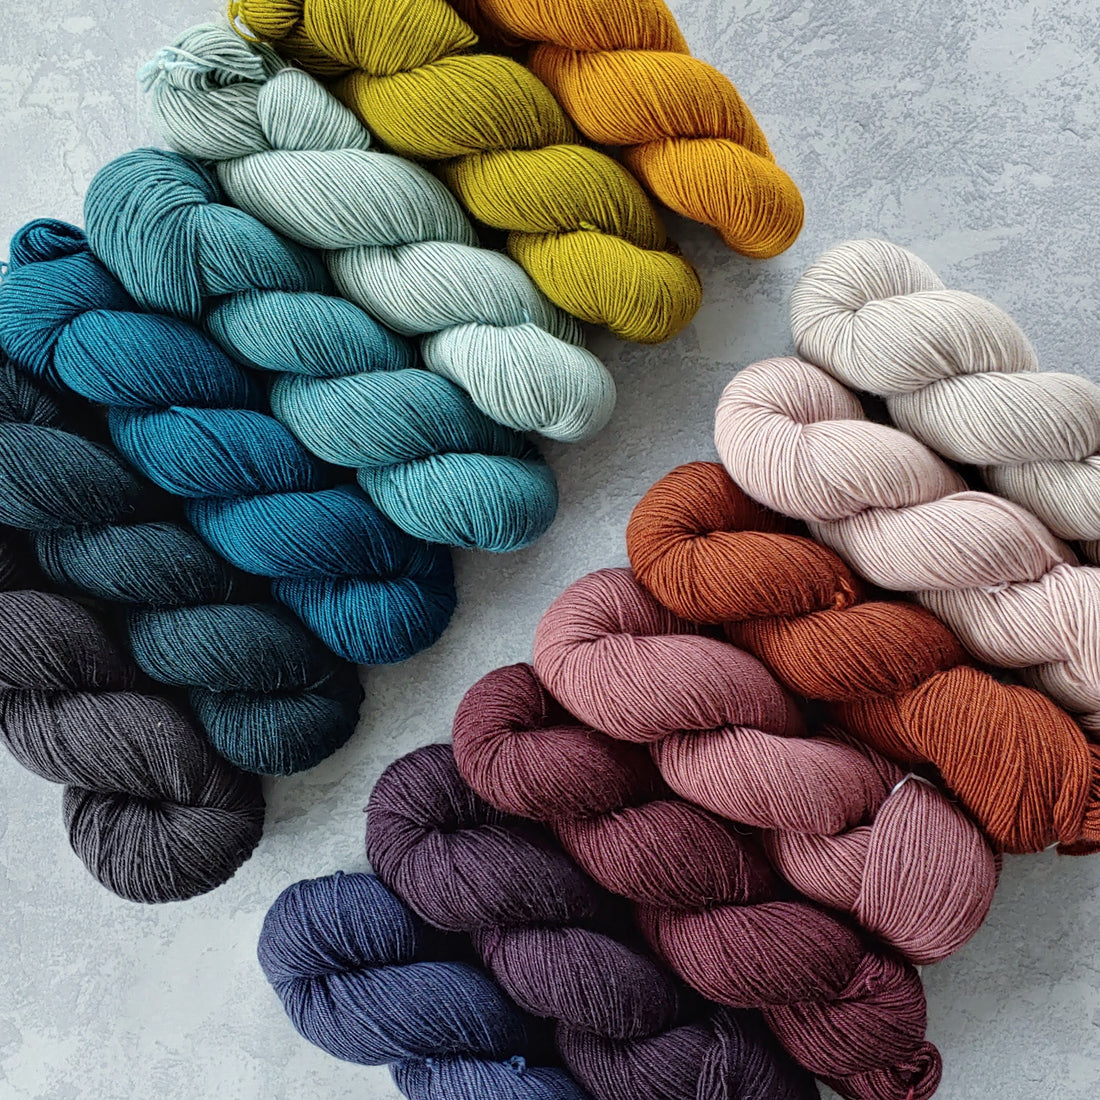  Yarn | Cashmere and Cashmere Blends